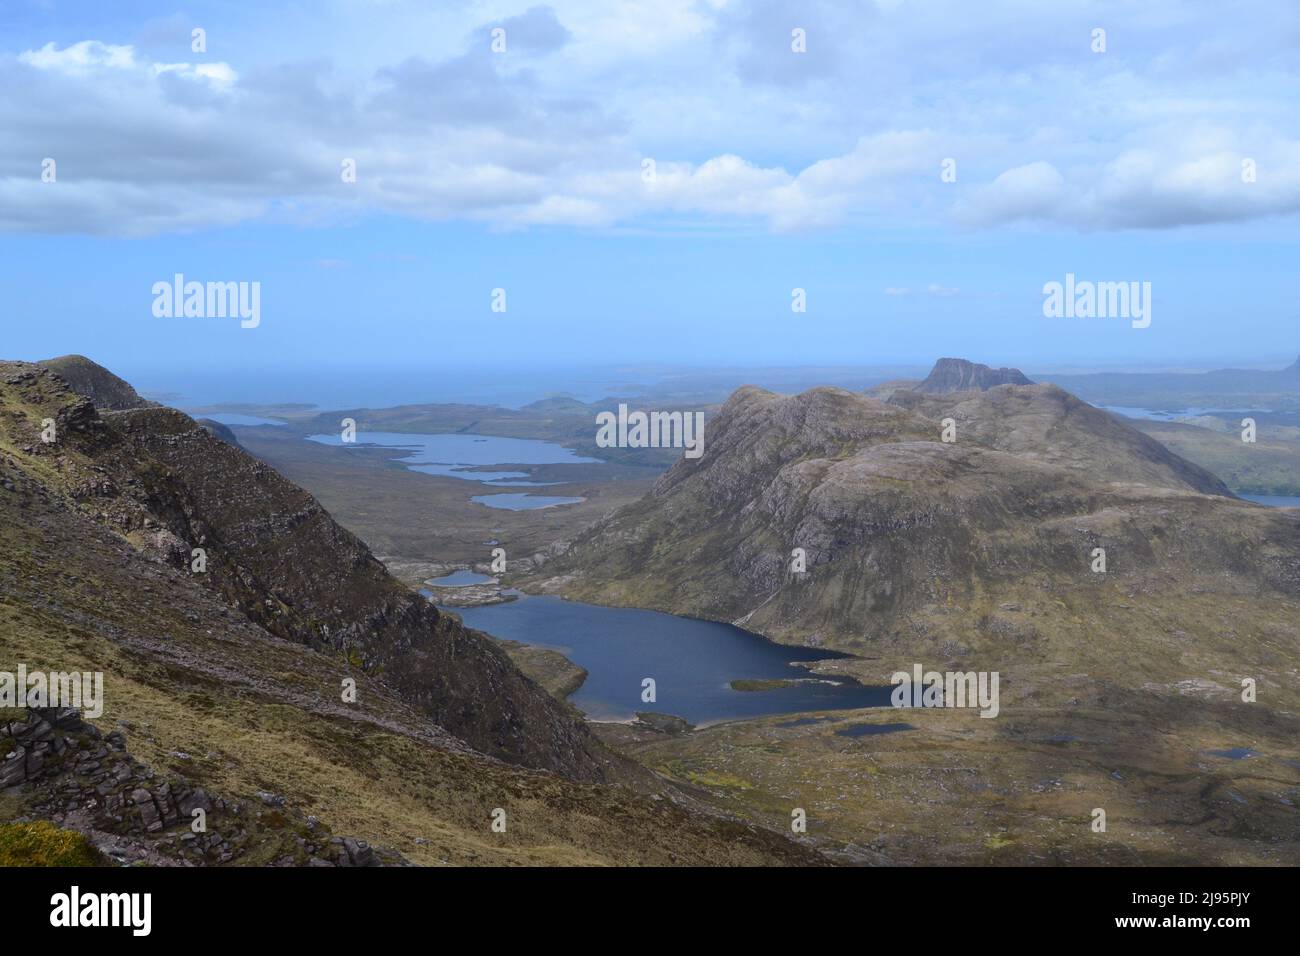 A view looking northwest from Ben Mor Coigach to Sgurr Fhidlheir (the Fiddler) and Stac Pollaidh across a lachlan. Loch Lurgain. Wild coastal scenery Stock Photo